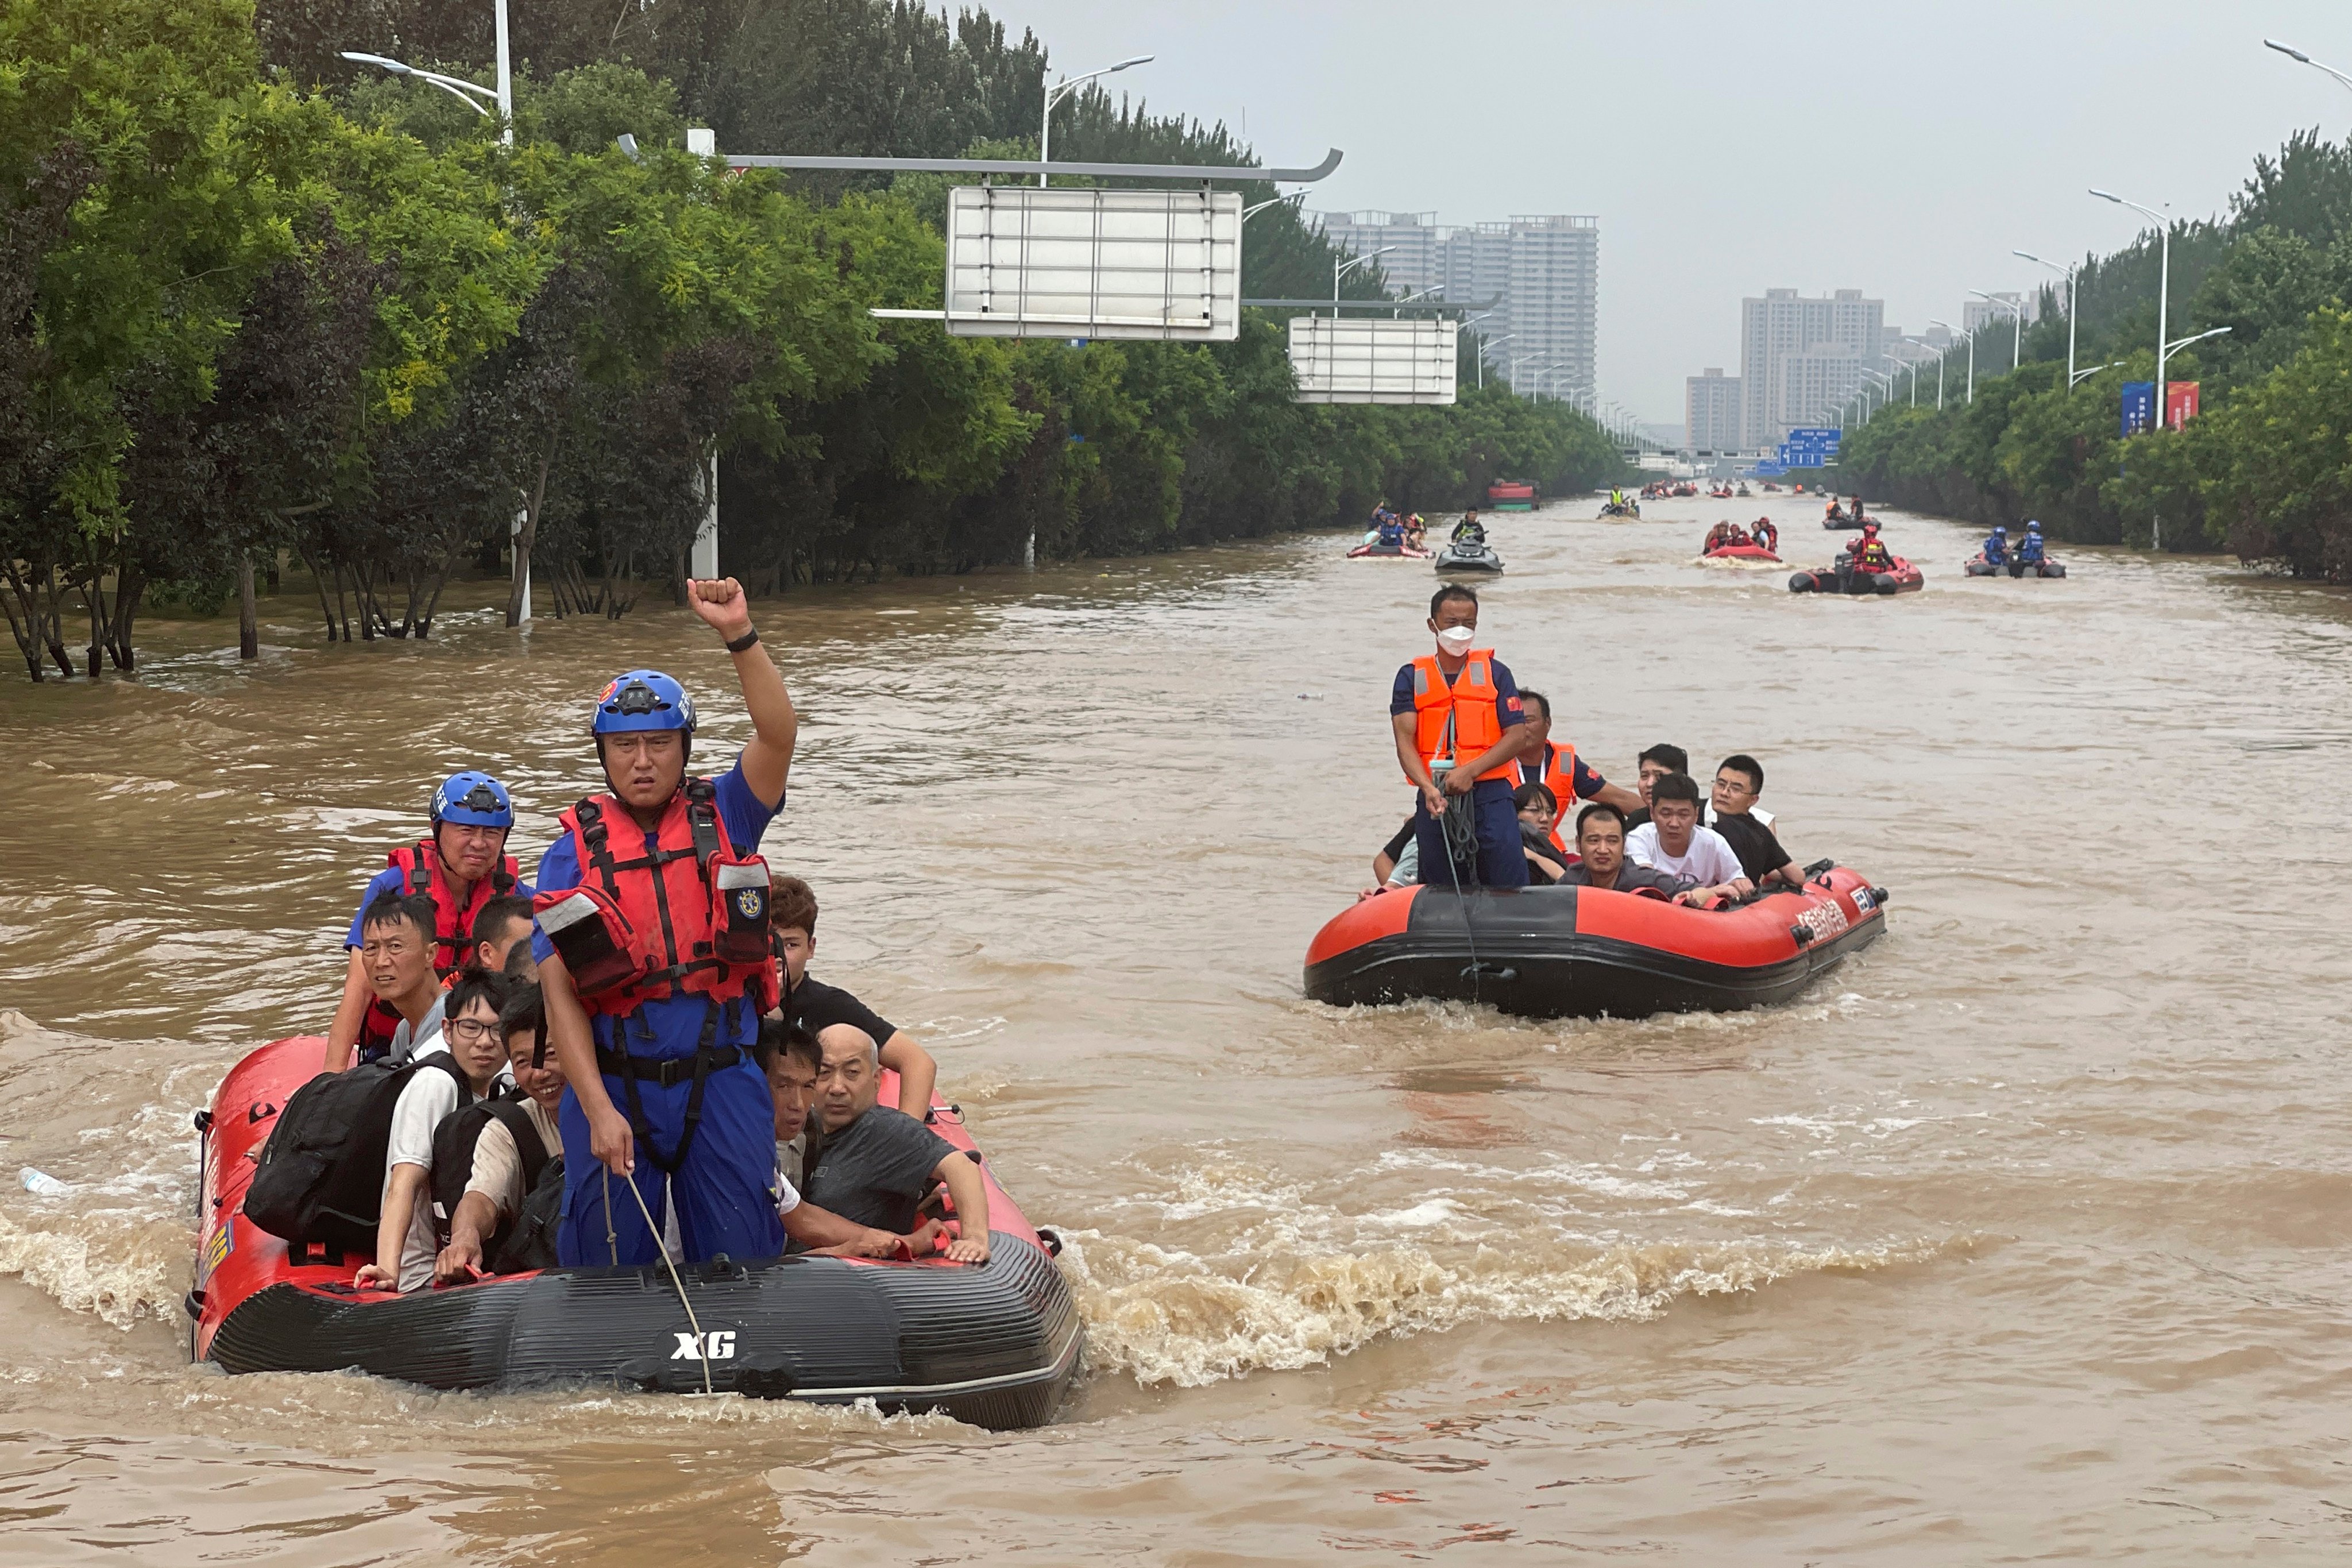 Residents are evacuated on rubber boats in Zhuozhou, in northern China’s Hebei province near Beijing. Photo: AP